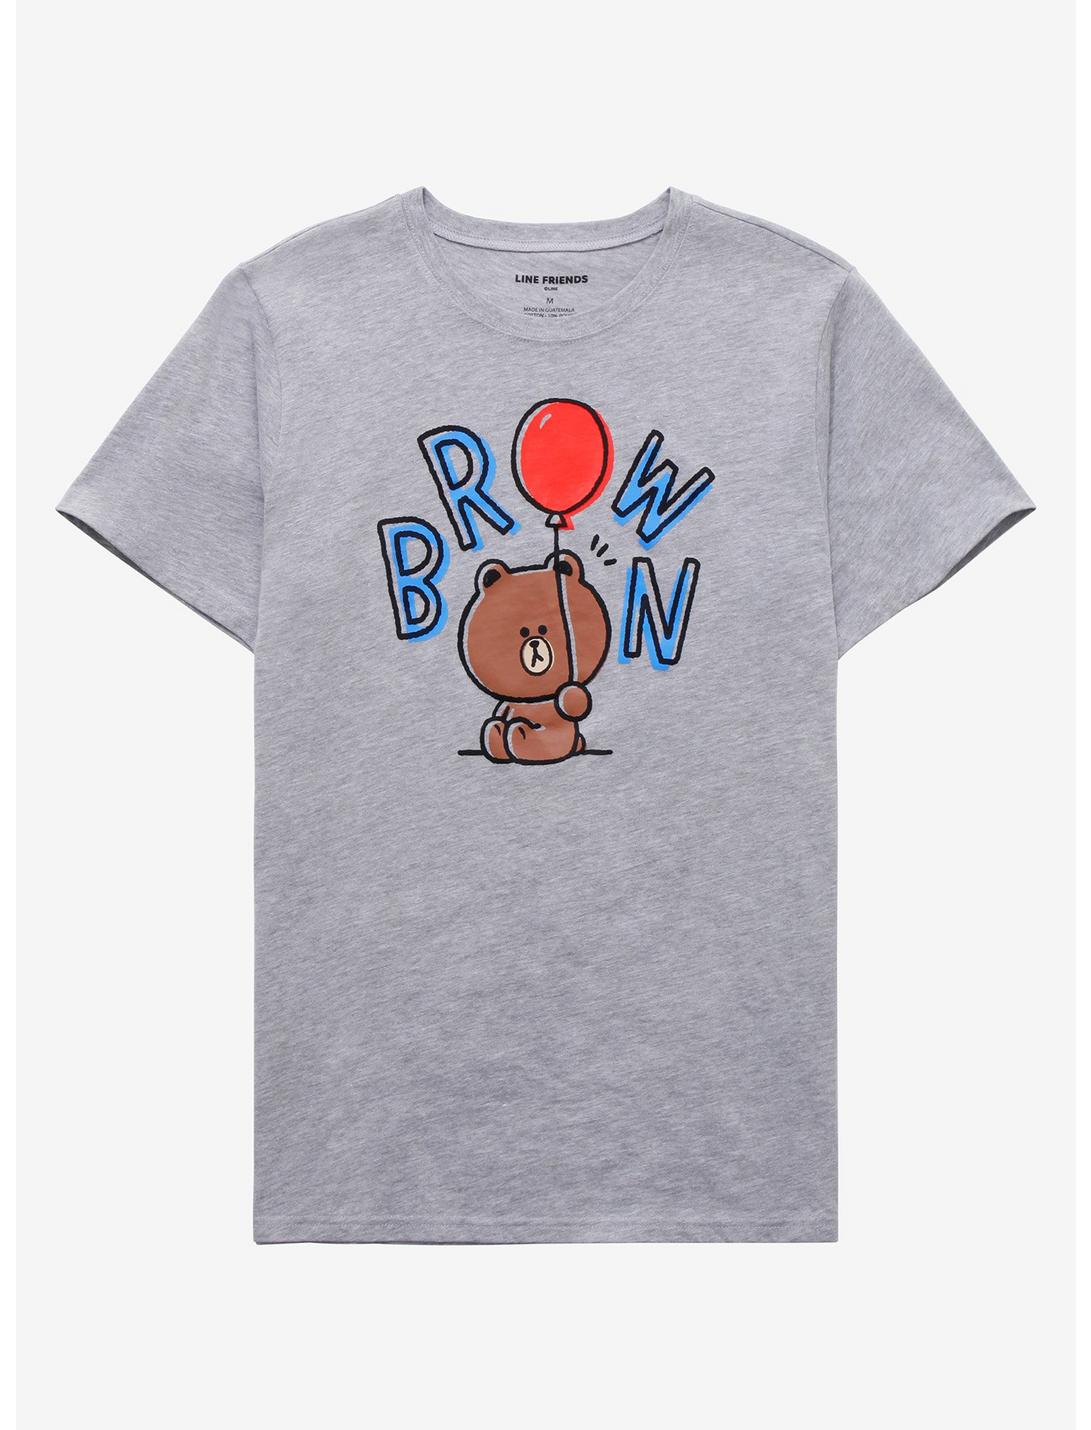 LINE FRIENDS BROWN with Balloon T-Shirt - BoxLunch Exclusive, HEATHER GREY, hi-res